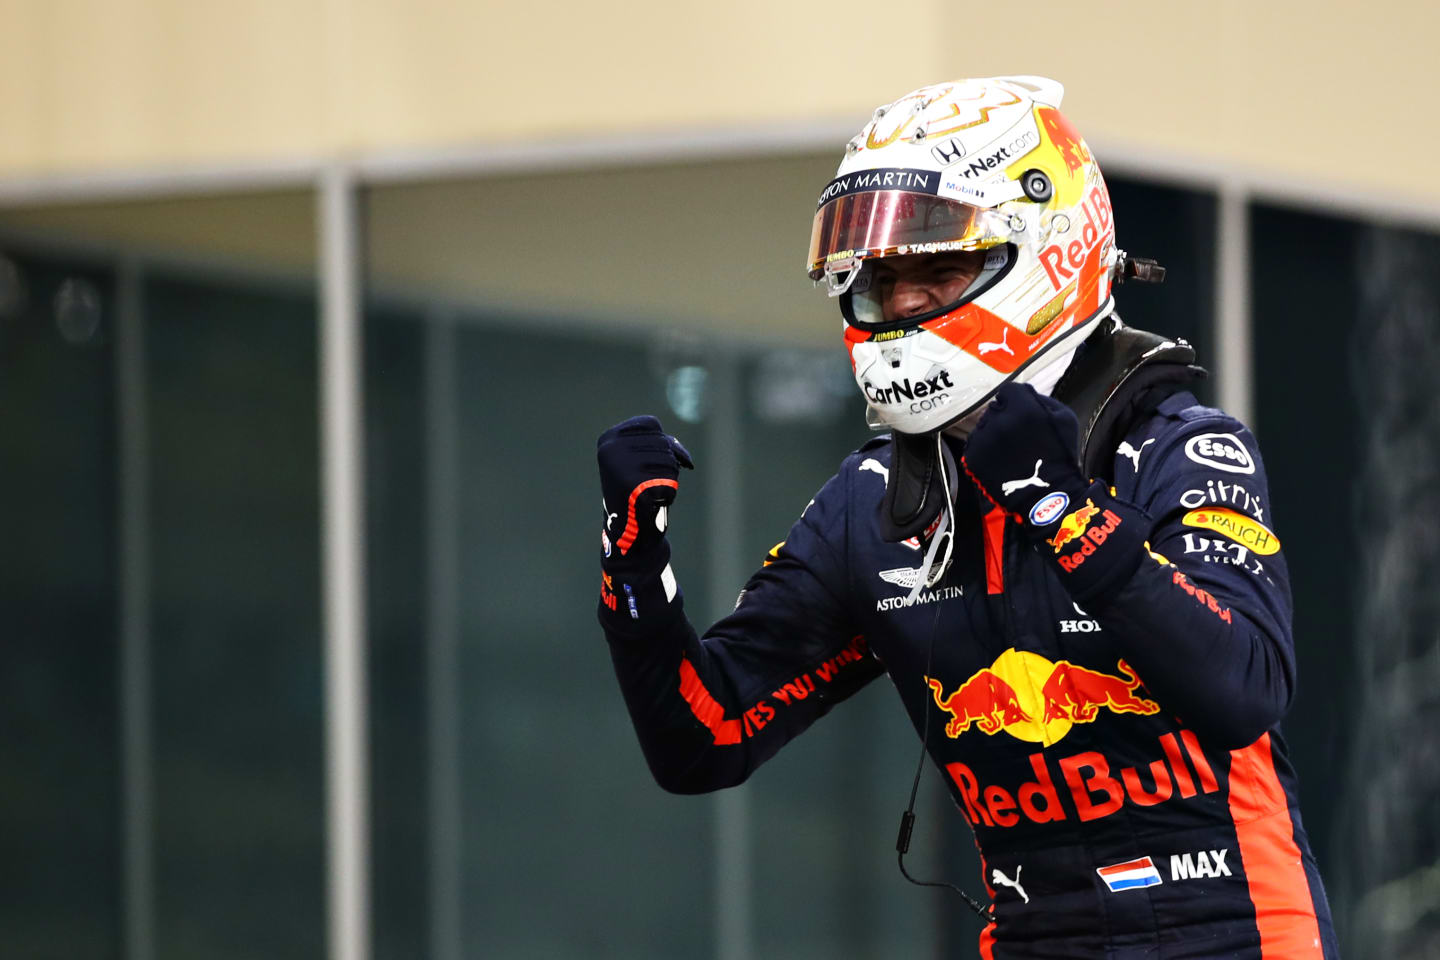 ABU DHABI, UNITED ARAB EMIRATES - DECEMBER 13: Race winner Max Verstappen of Netherlands and Red Bull Racing celebrates in parc ferme during the F1 Grand Prix of Abu Dhabi at Yas Marina Circuit on December 13, 2020 in Abu Dhabi, United Arab Emirates. (Photo by Mark Thompson/Getty Images)